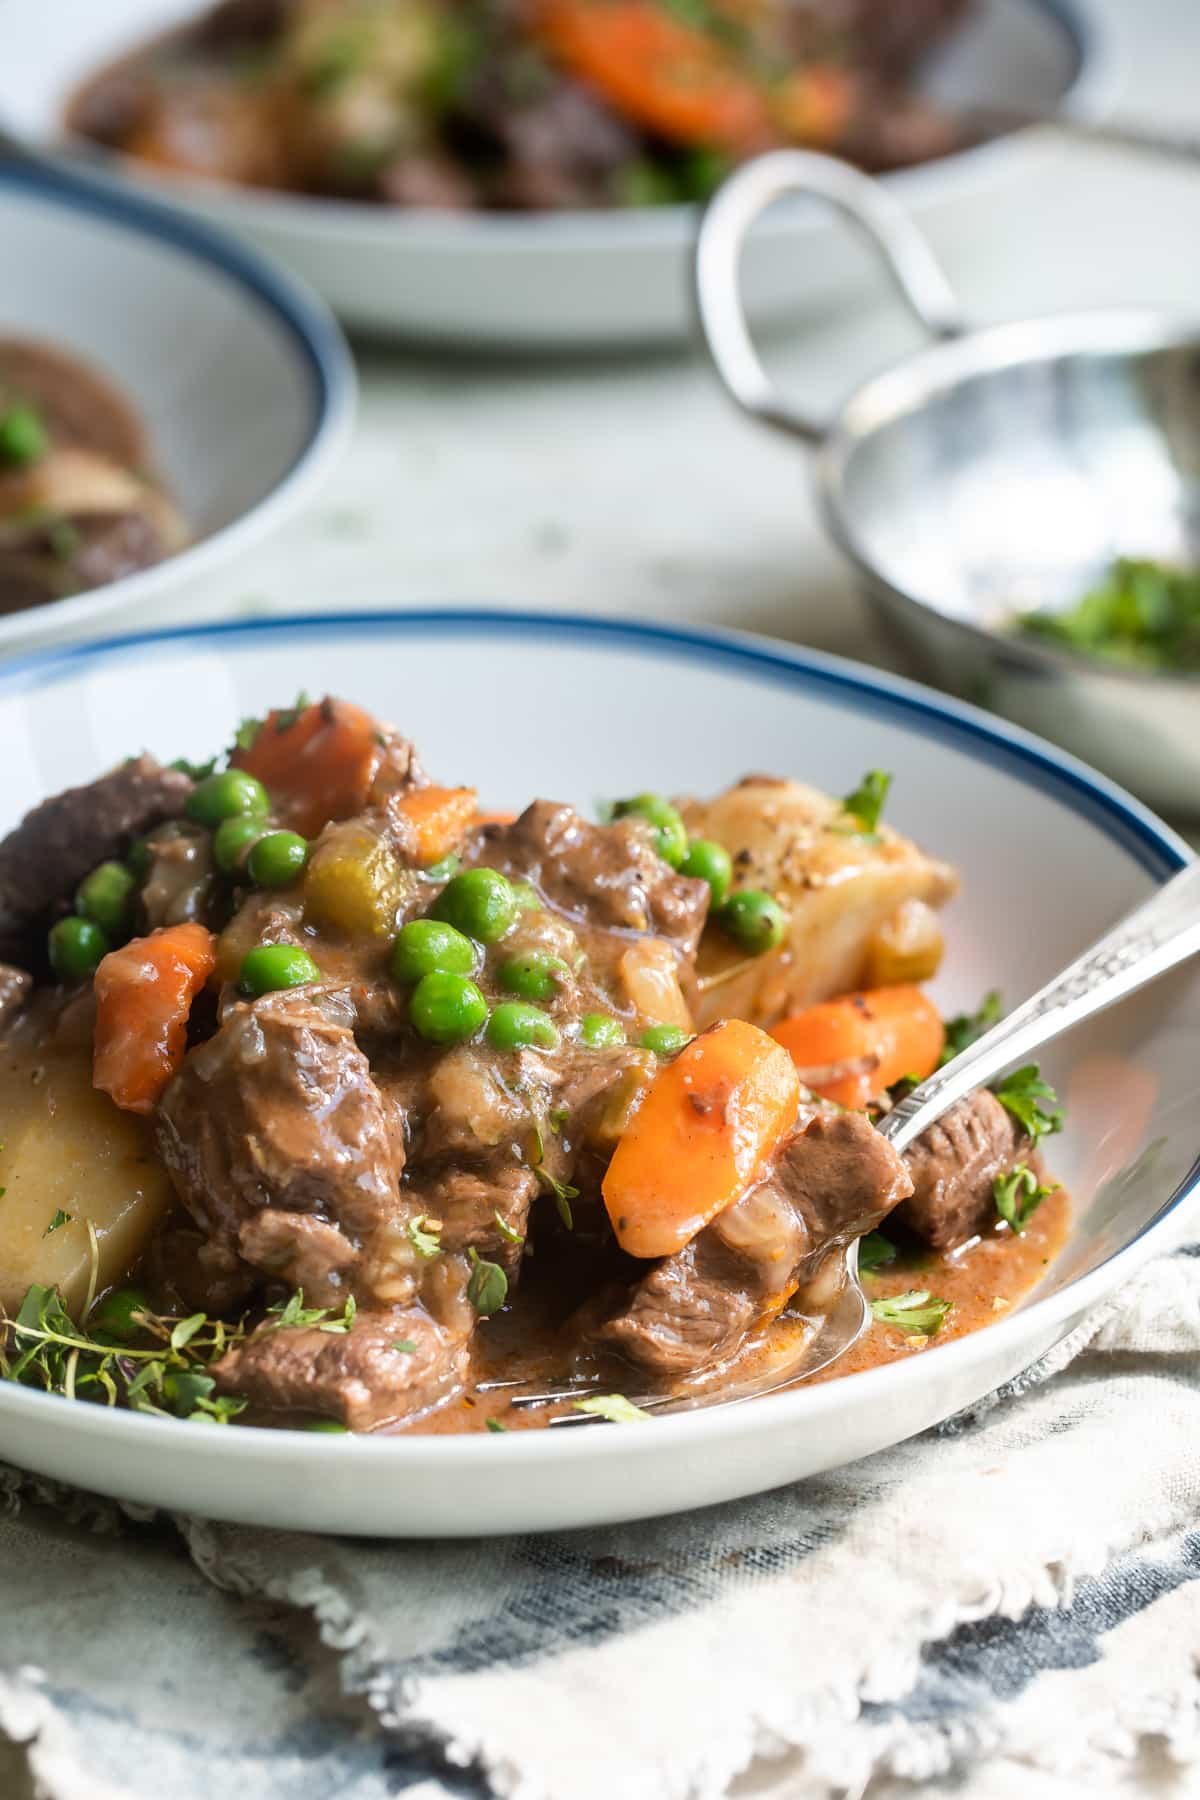 Bowls of venison stew on a table.